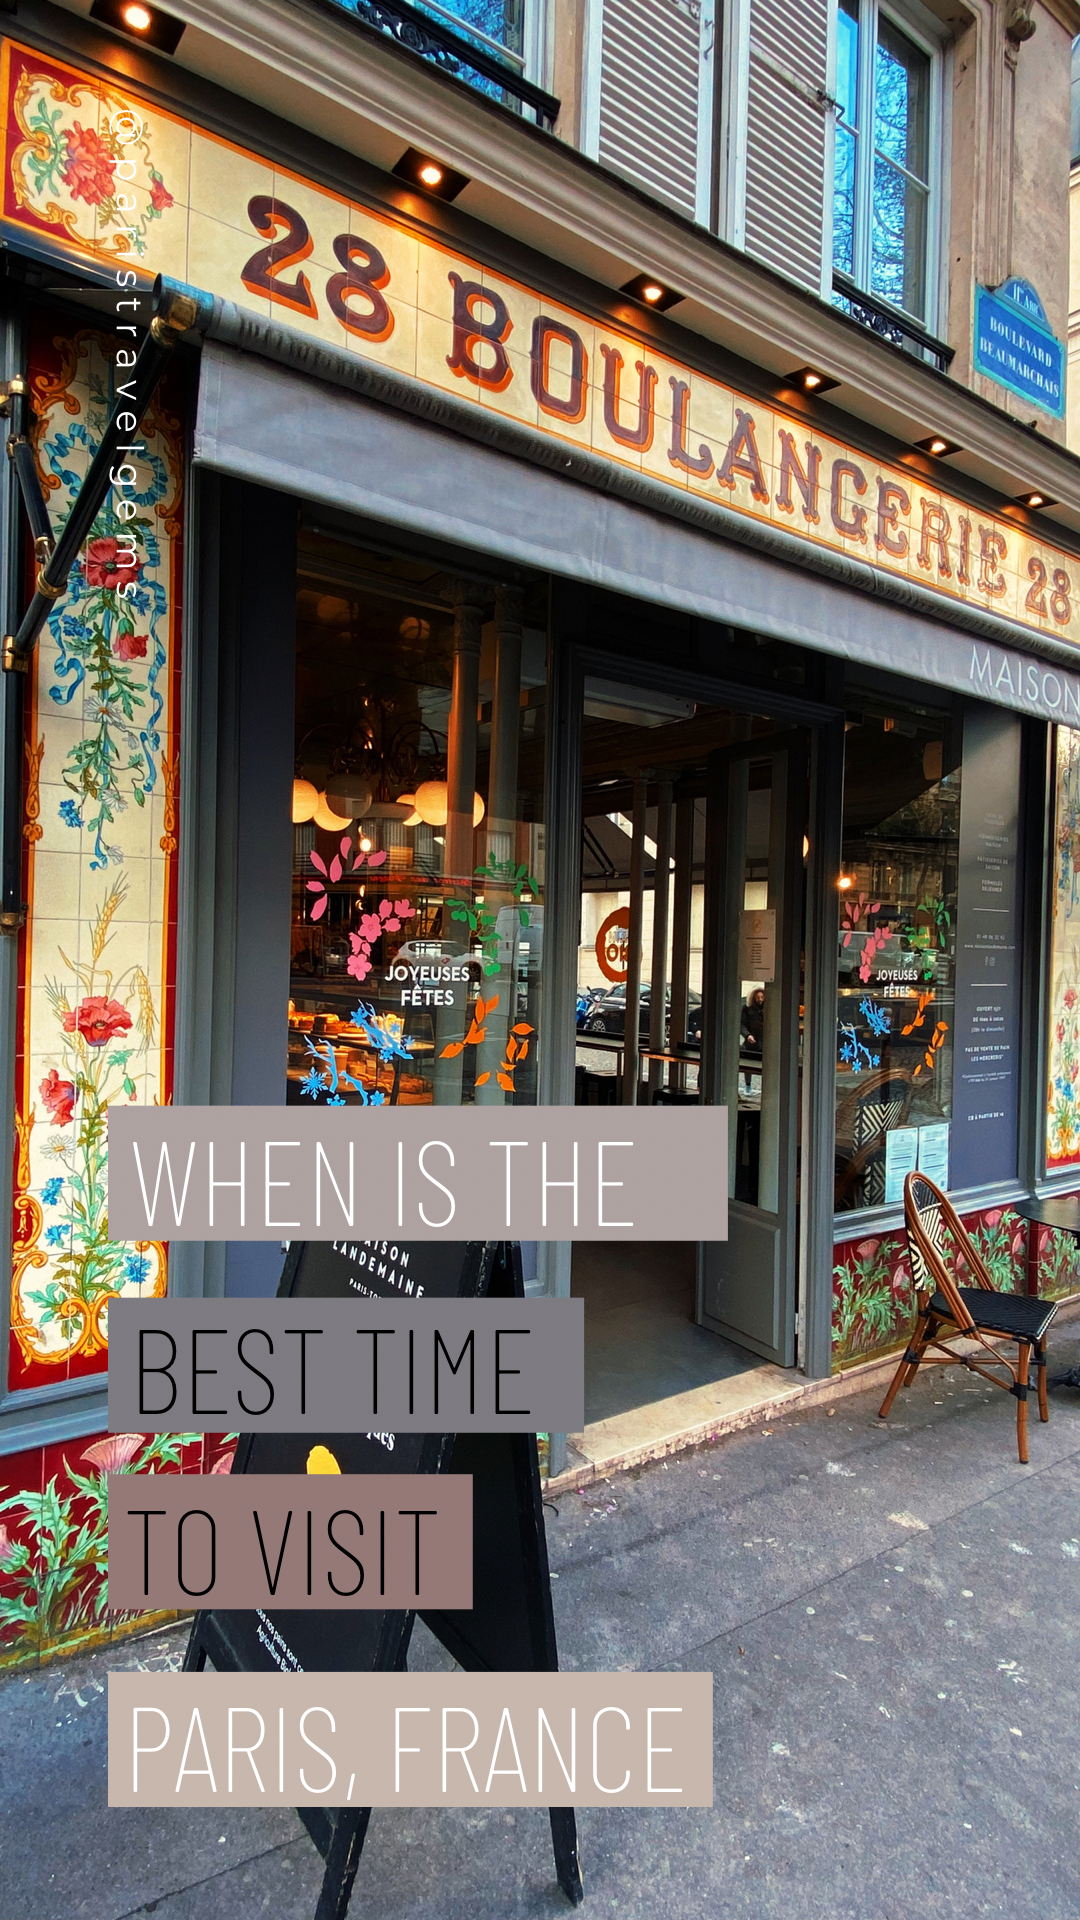 When Is The Best Time to Visit Paris, France